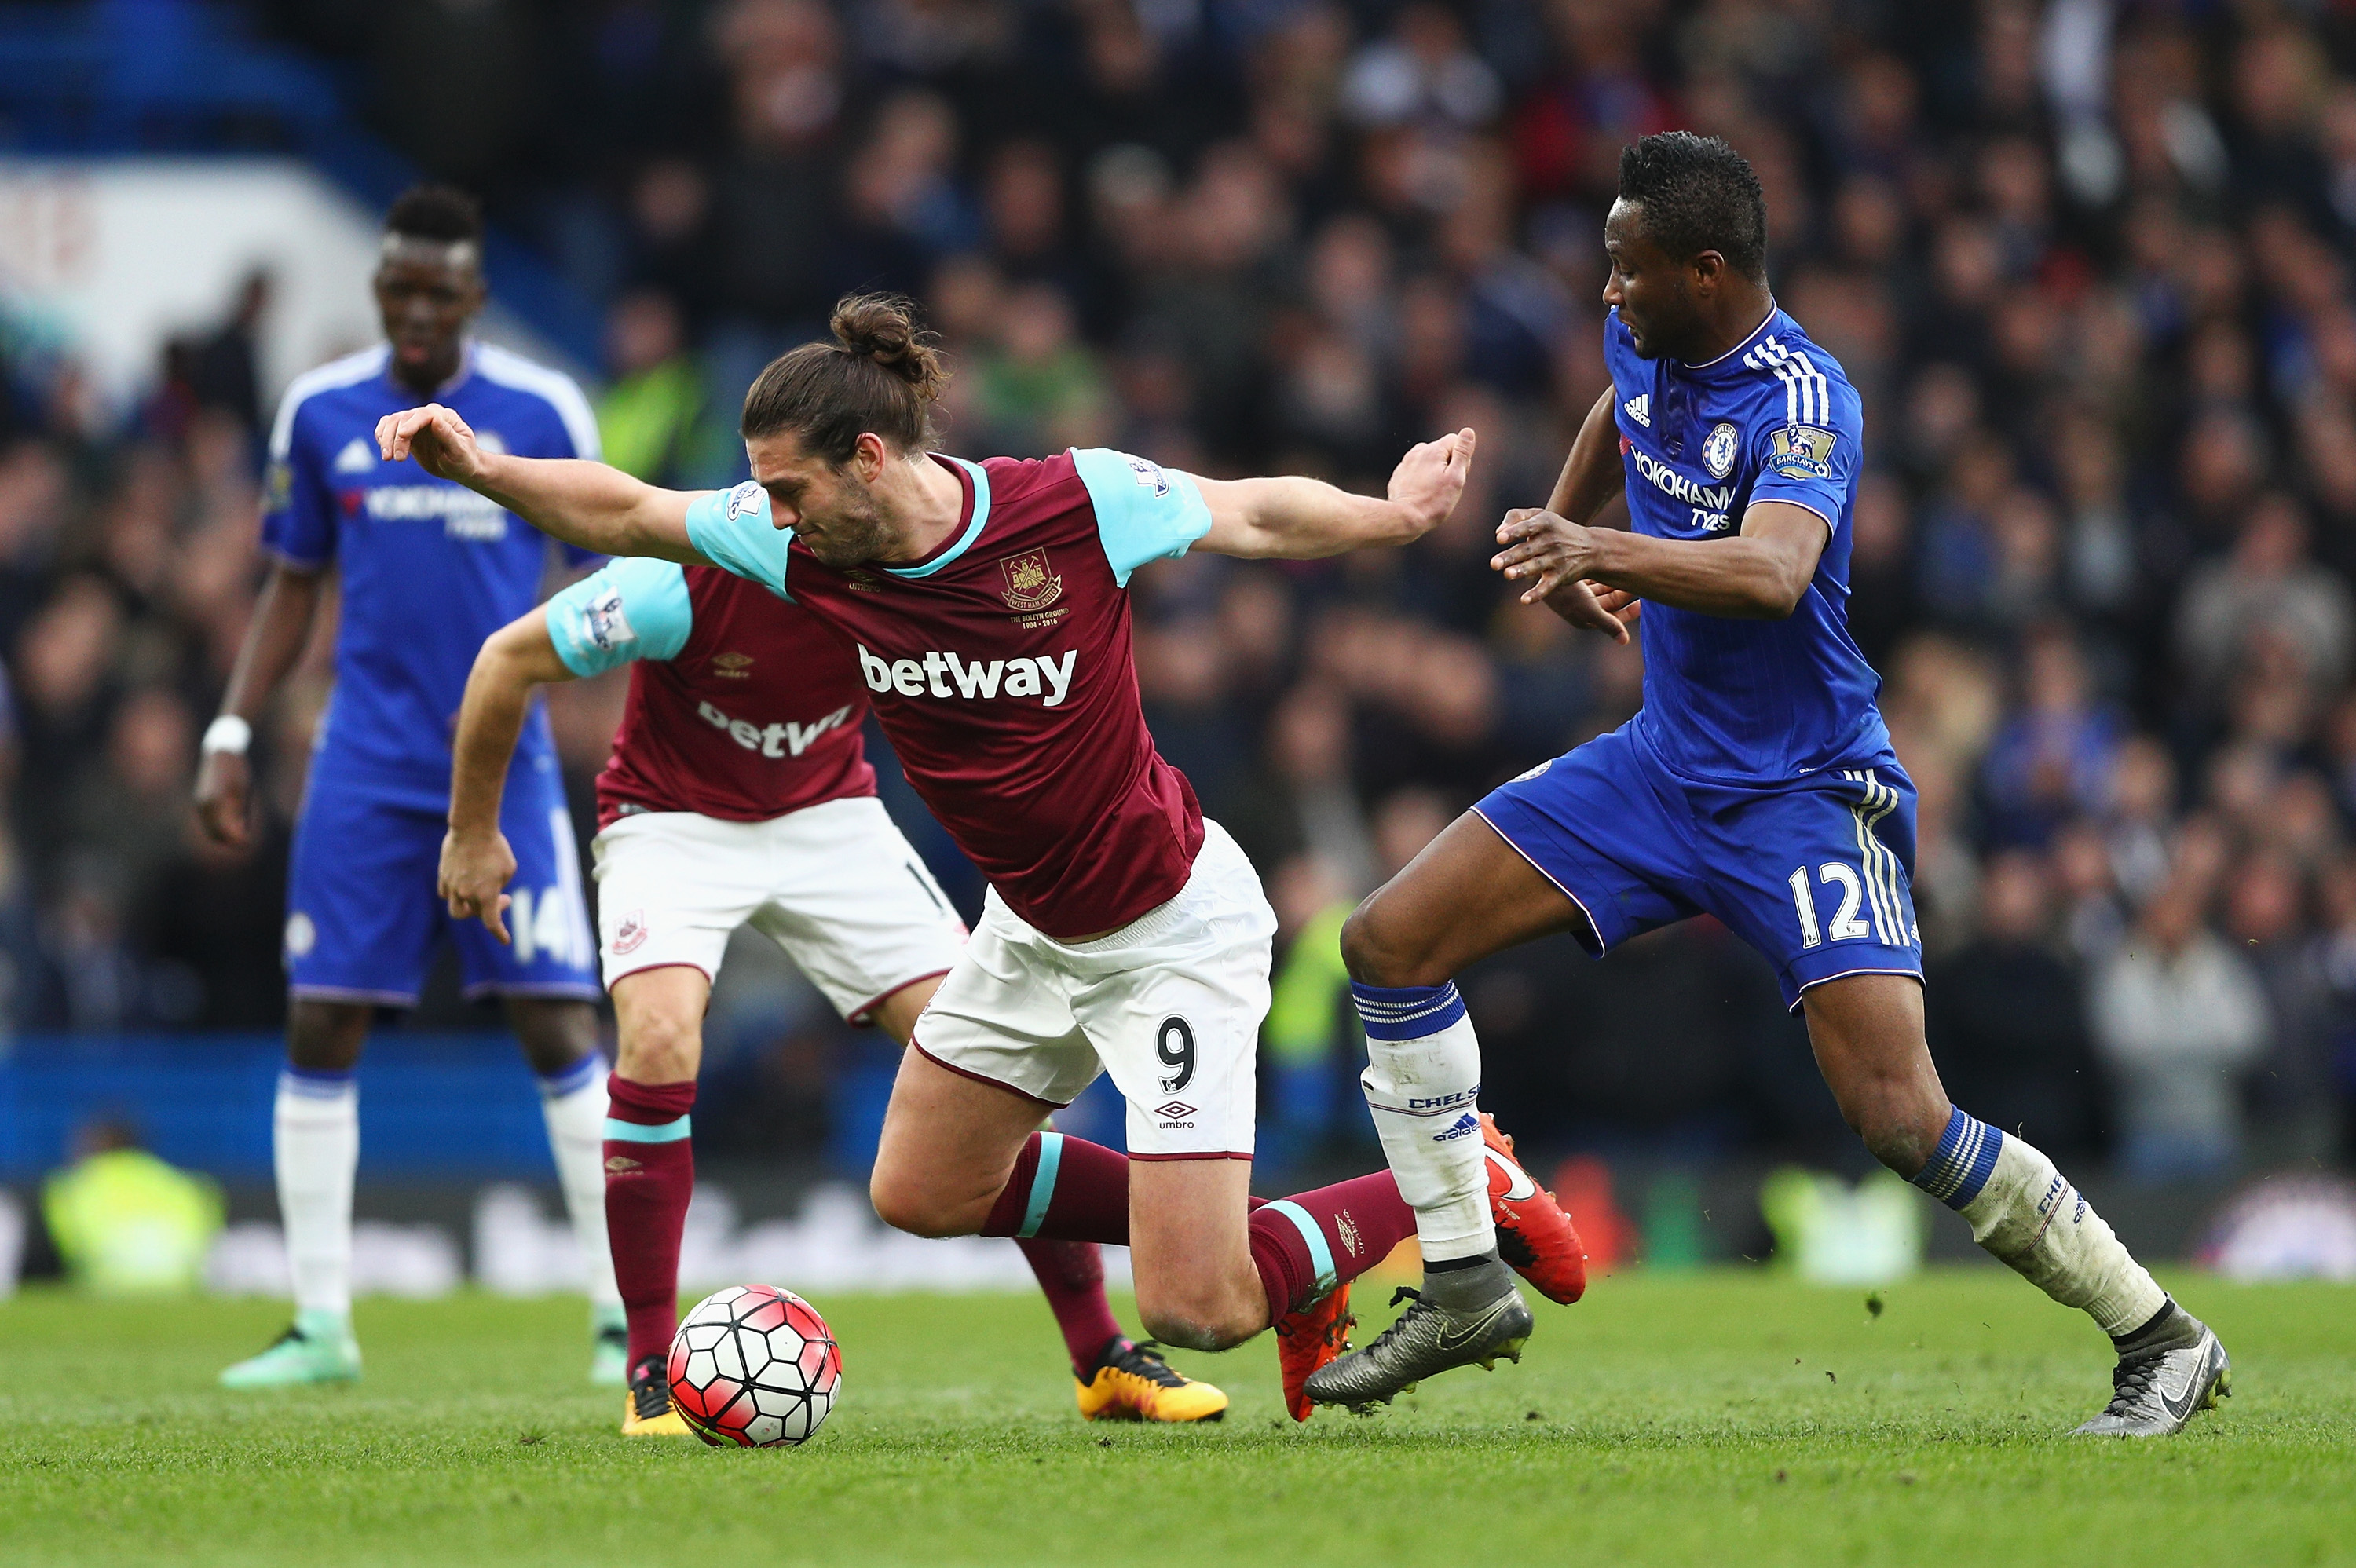 LONDON, ENGLAND - MARCH 19:  Andy Carroll of West Ham United is challenged by John Mikel Obi of Chelsea during the Barclays Premier League match between Chelsea and West Ham United at Stamford Bridge on March 19, 2016 in London, United Kingdom.  (Photo by Paul Gilham/Getty Images)